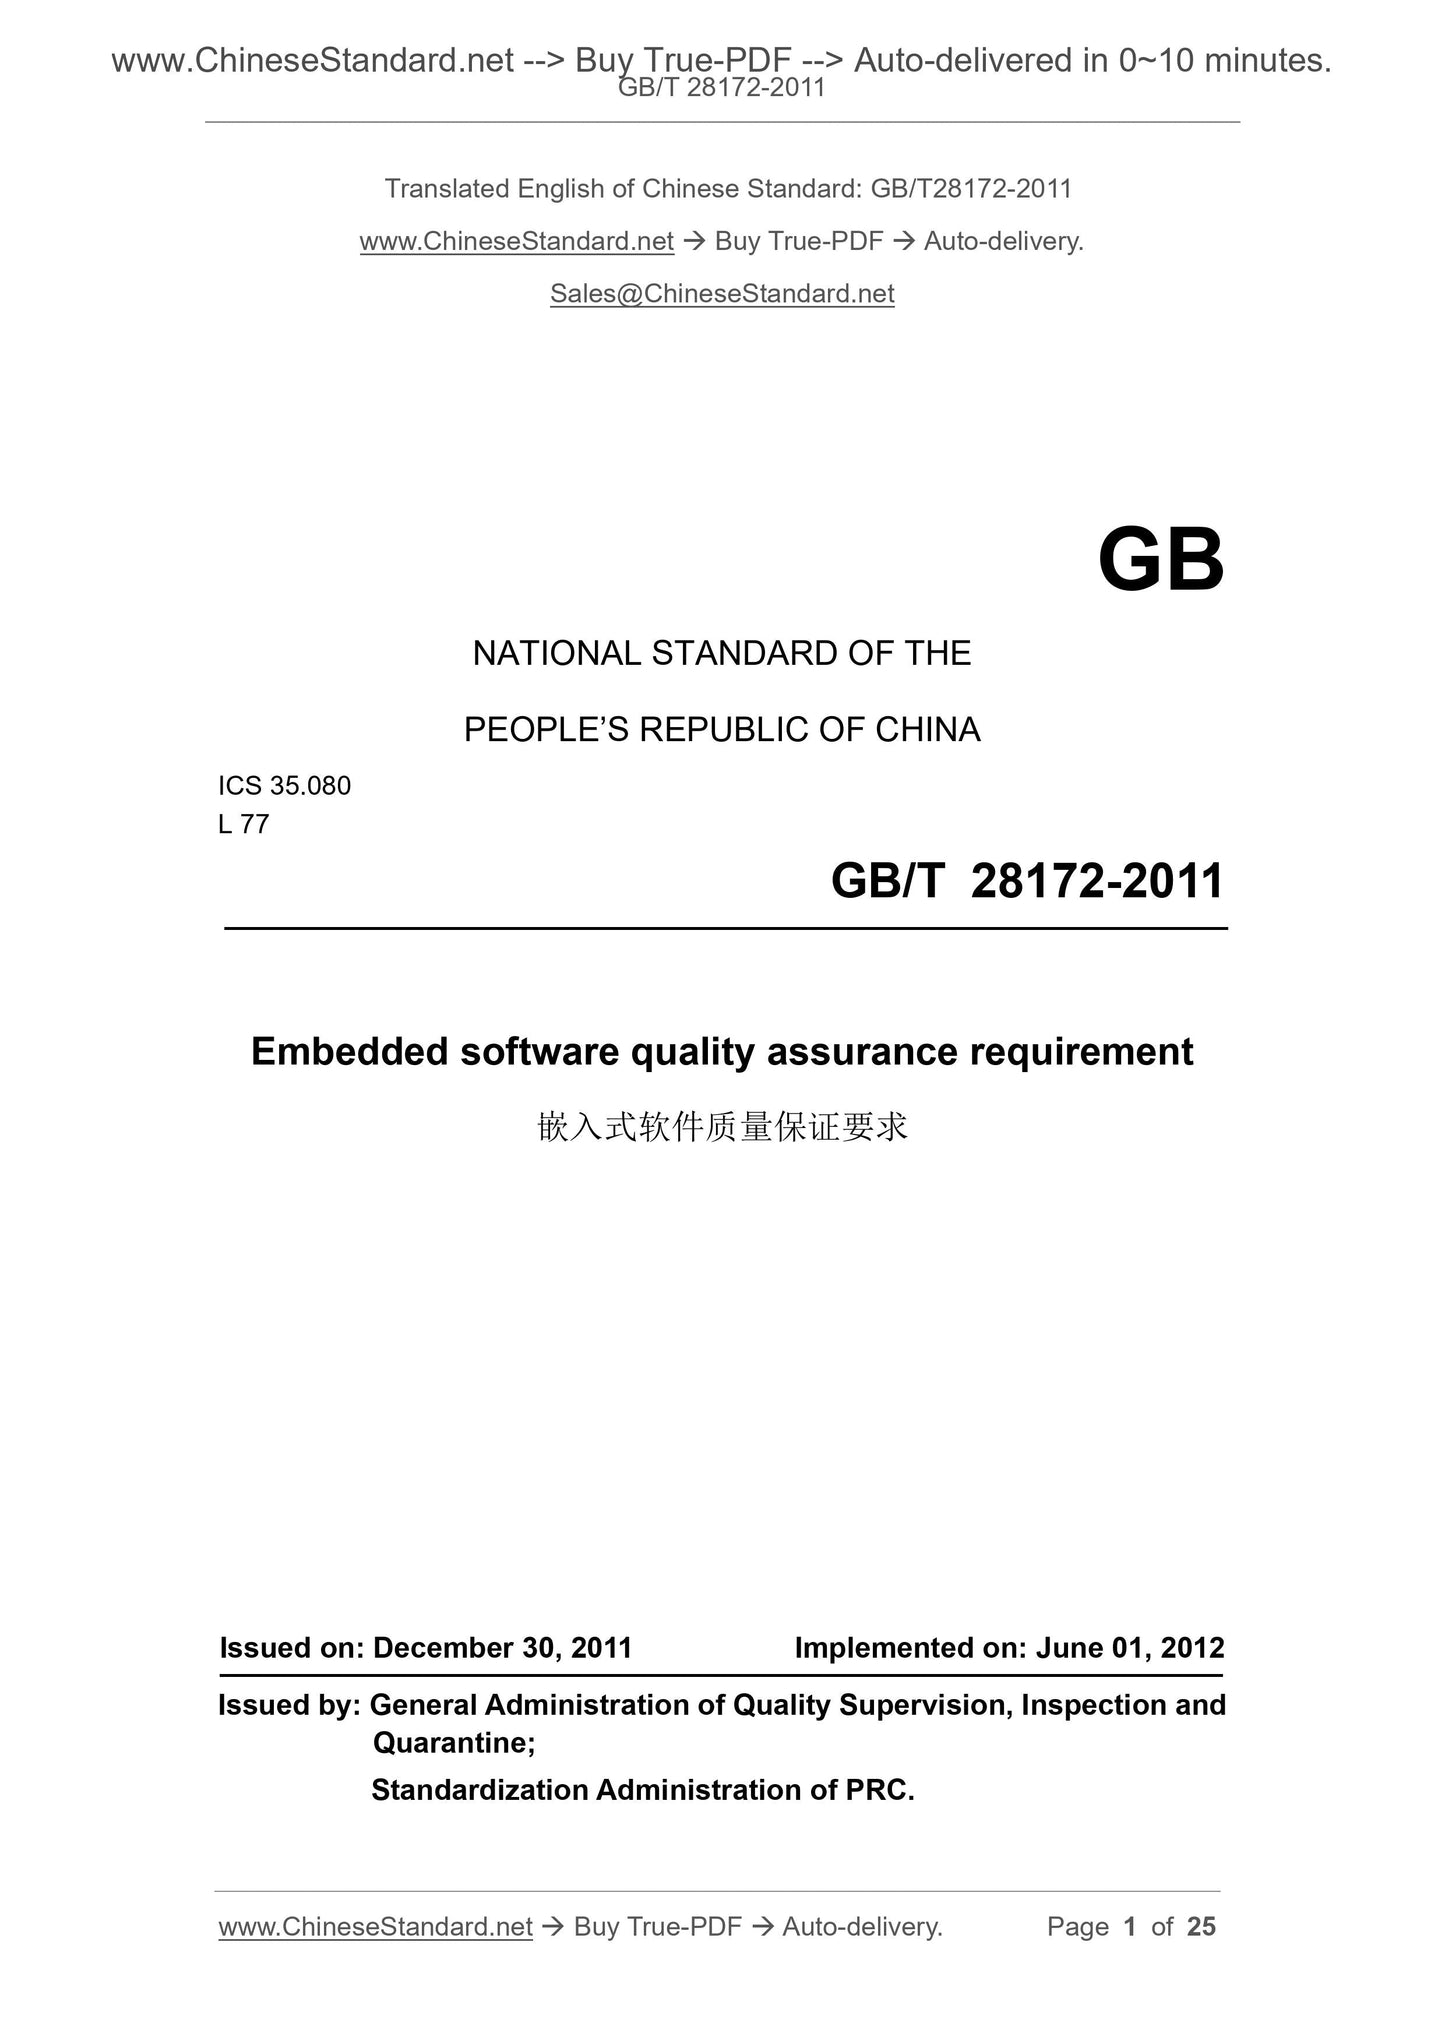 GB/T 28172-2011 Page 1